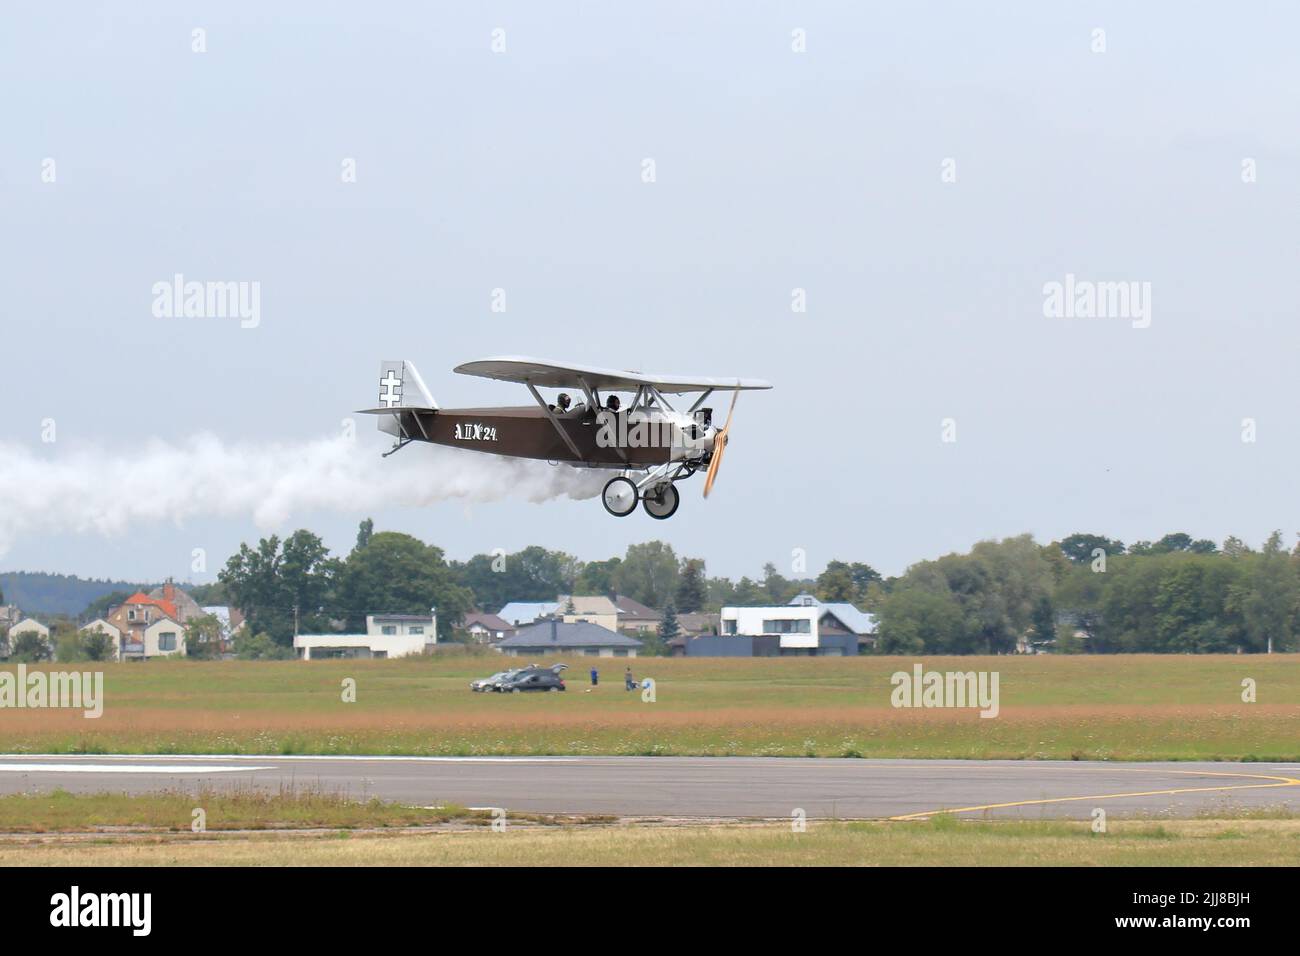 KAUNAS / LITHUANIA - August 10, 2019: Lithuanian ANBO II replica vintage aircraft (originally designed by Antanas Gustaitis in 1927) flying display Stock Photo